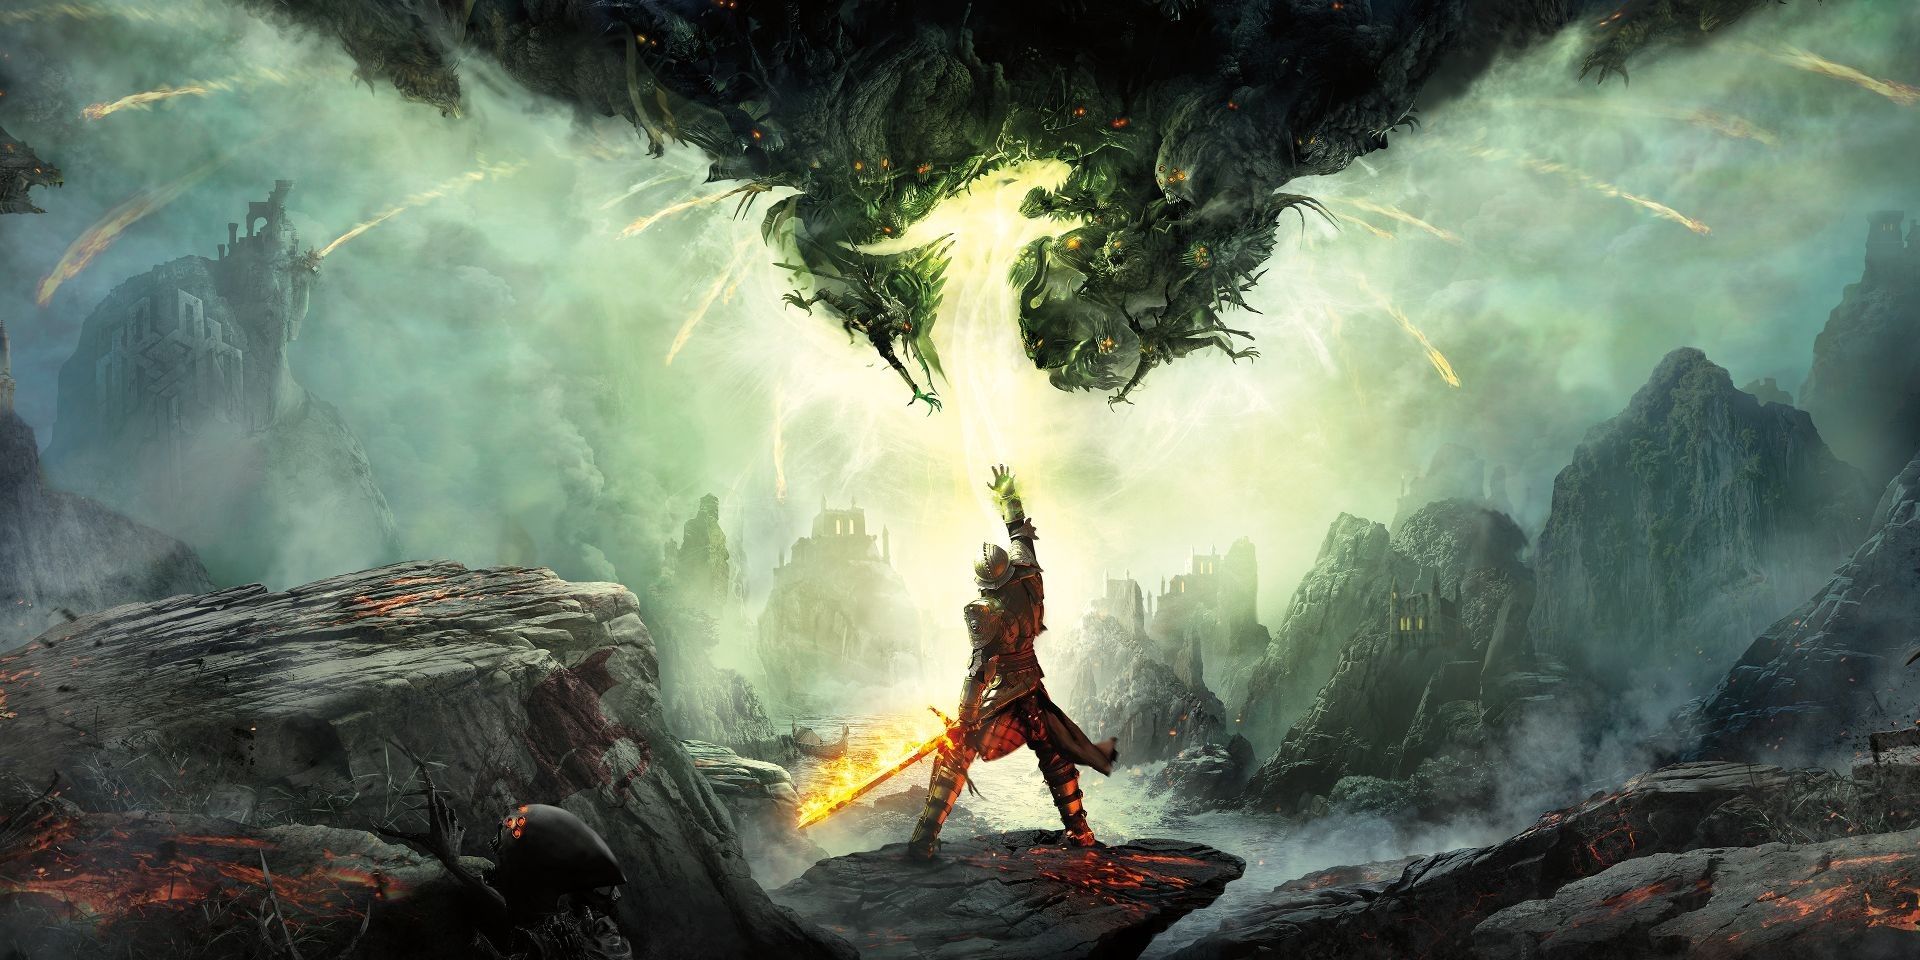 Dragon Age Inquisition - main character fighting an evil cloud of darkness